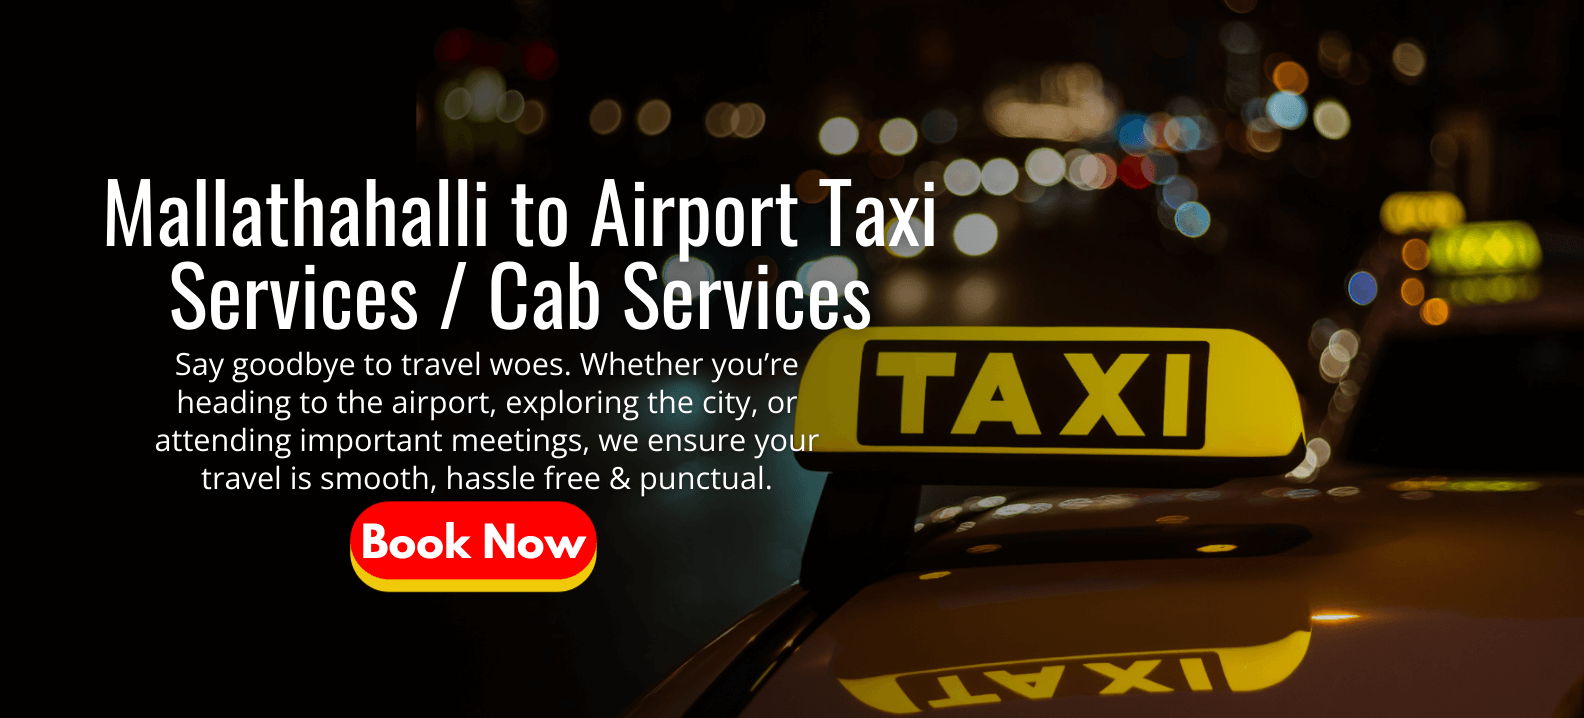 Mallathahalli to Airport Taxi Services _ Cab Services